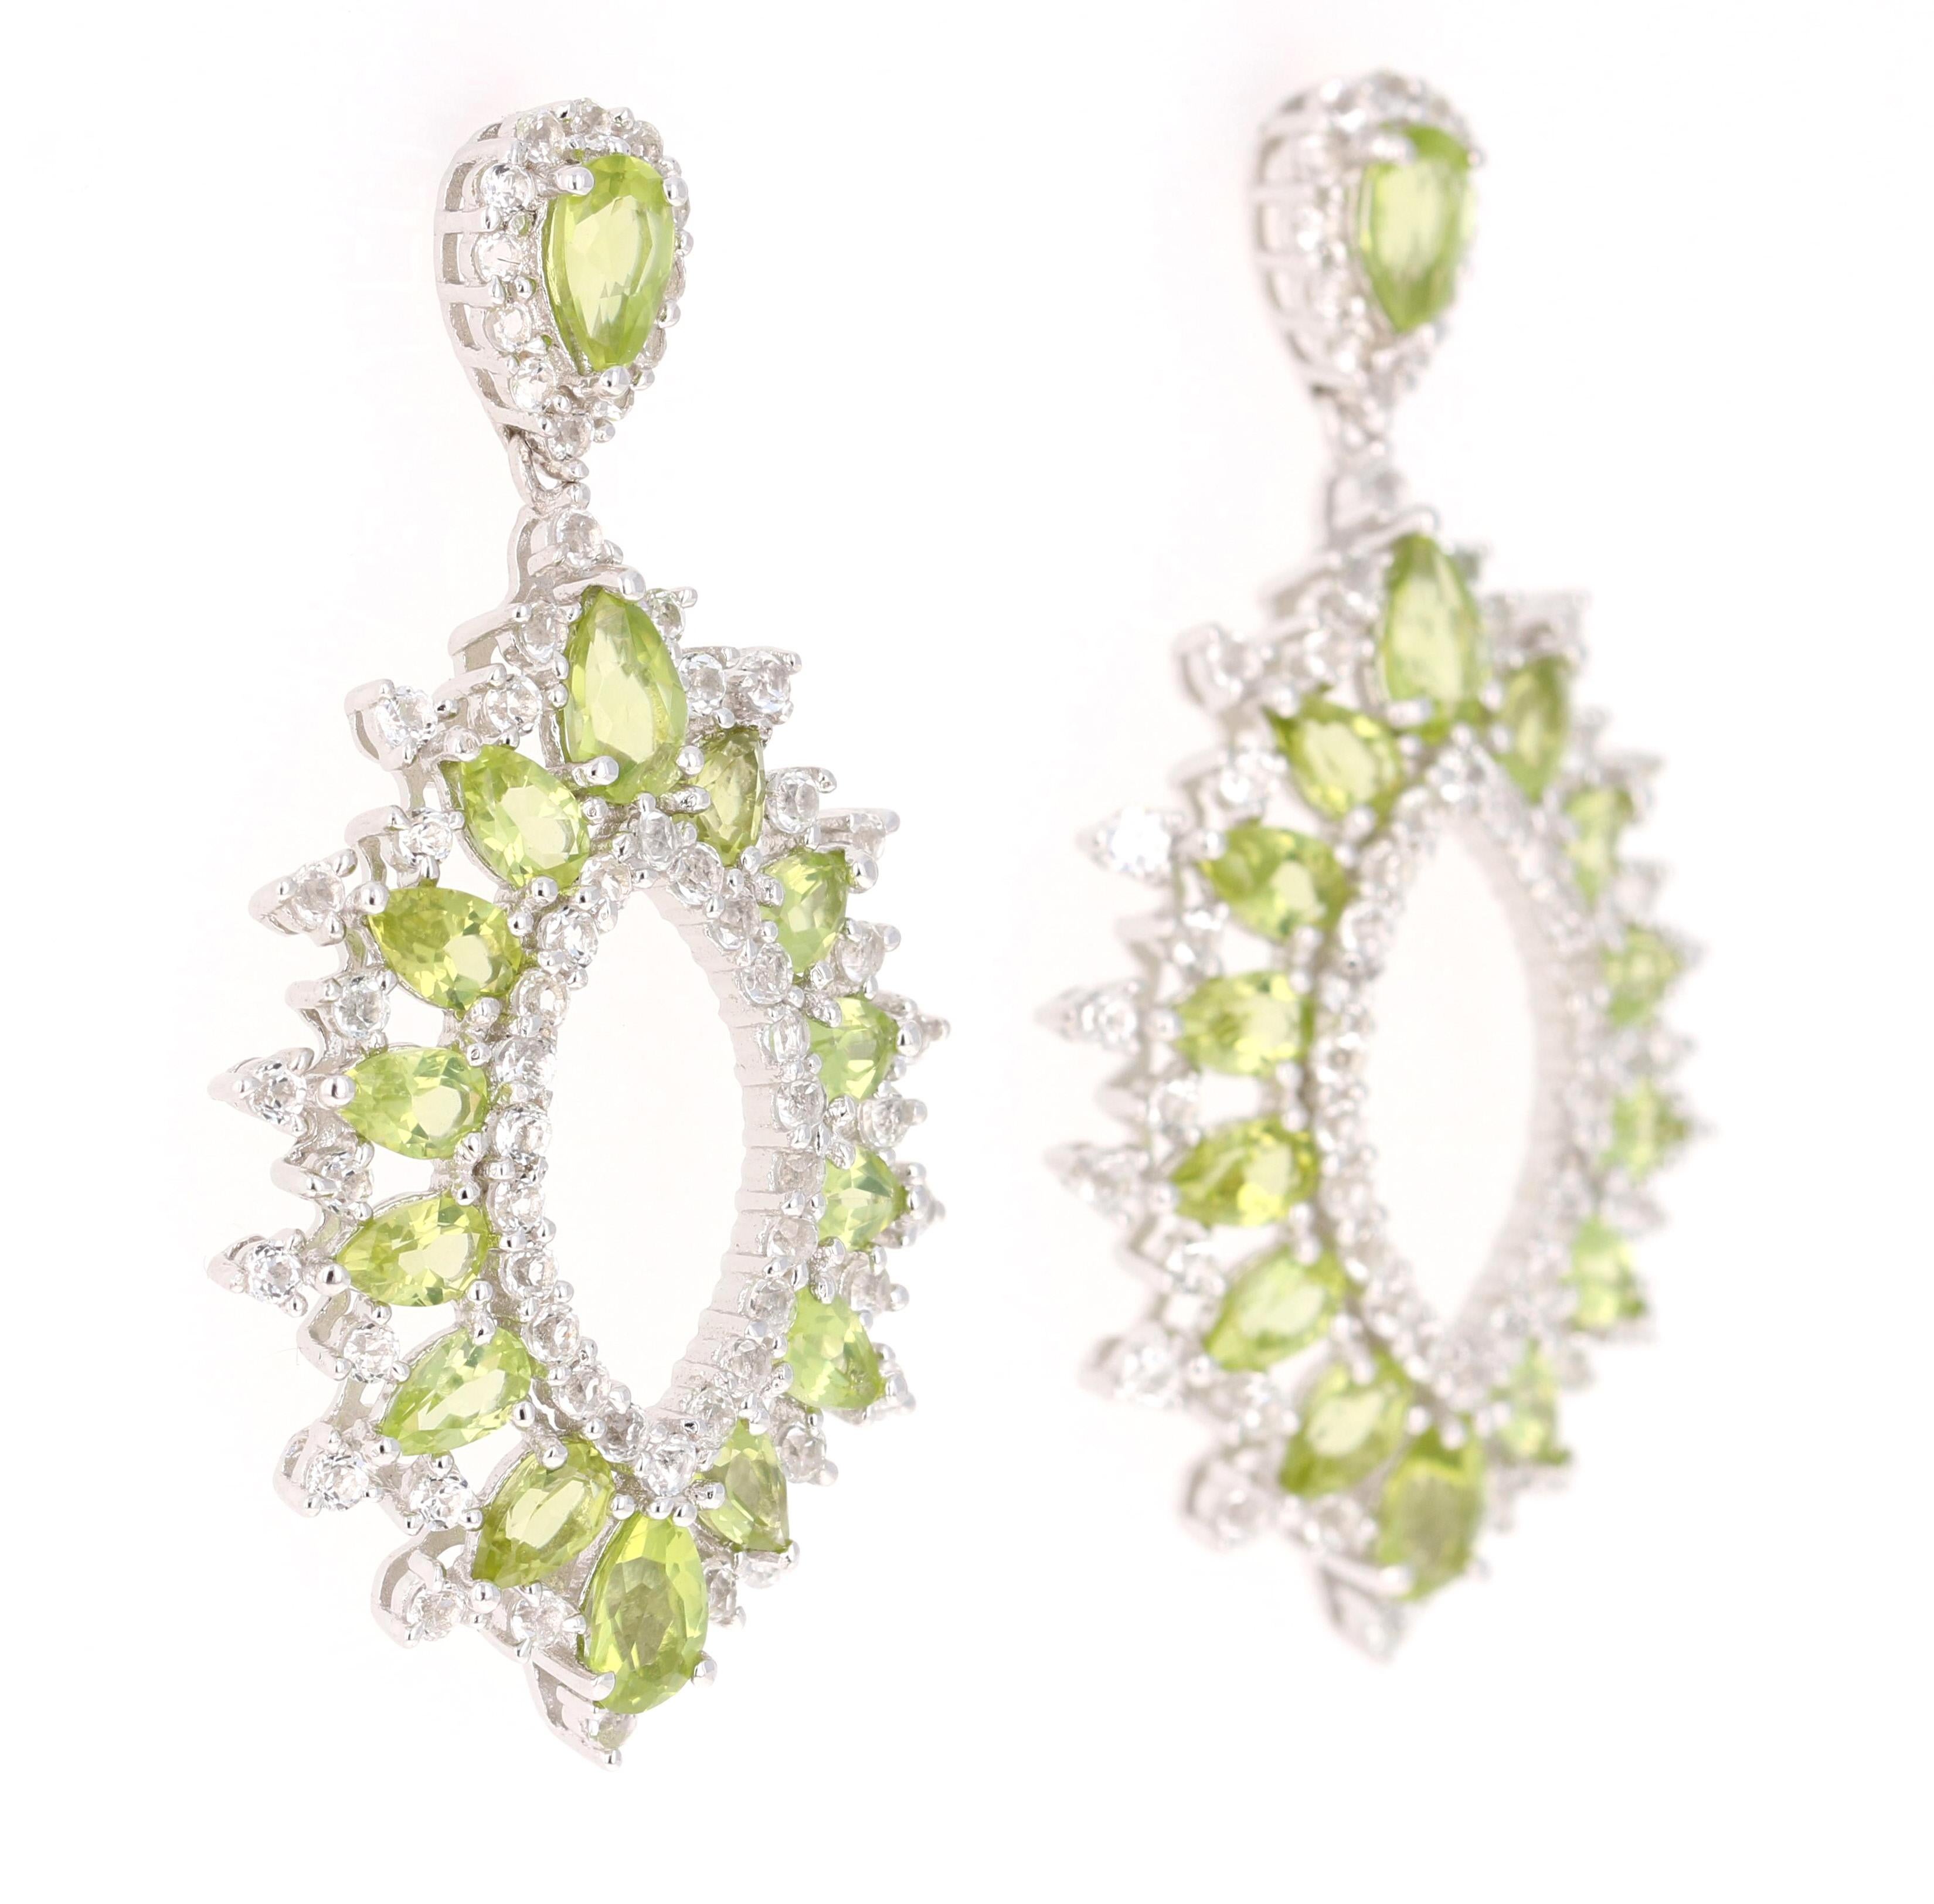 Stunning Chandelier Dangle Earrings 

These earrings have 6.74 Carats of Peridot and White Topaz

They are beautifully curated in 925 Silver weighing approximately 11.8 grams 

They are 1.75 inches long. 
